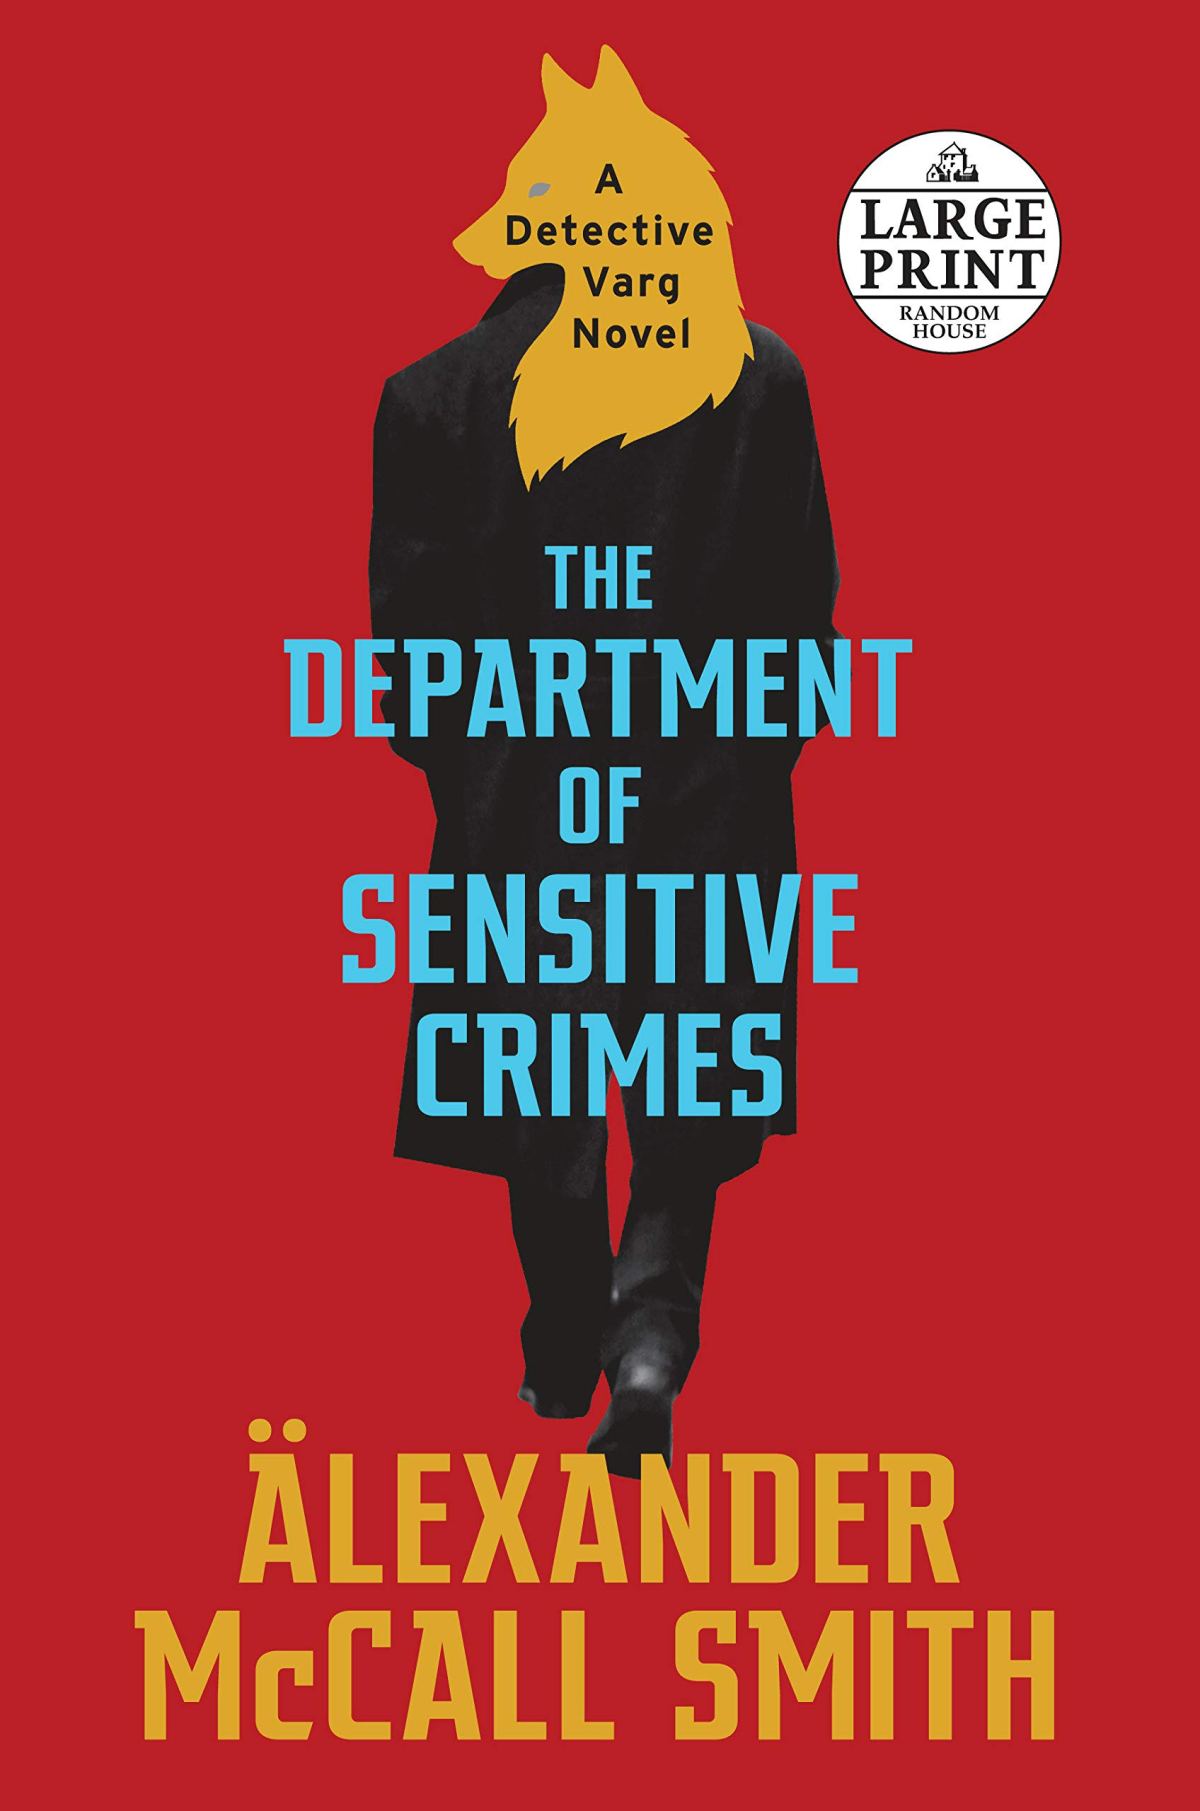 Book 65 – The Department of Sensitive Crimes by Alexander McCall Smith